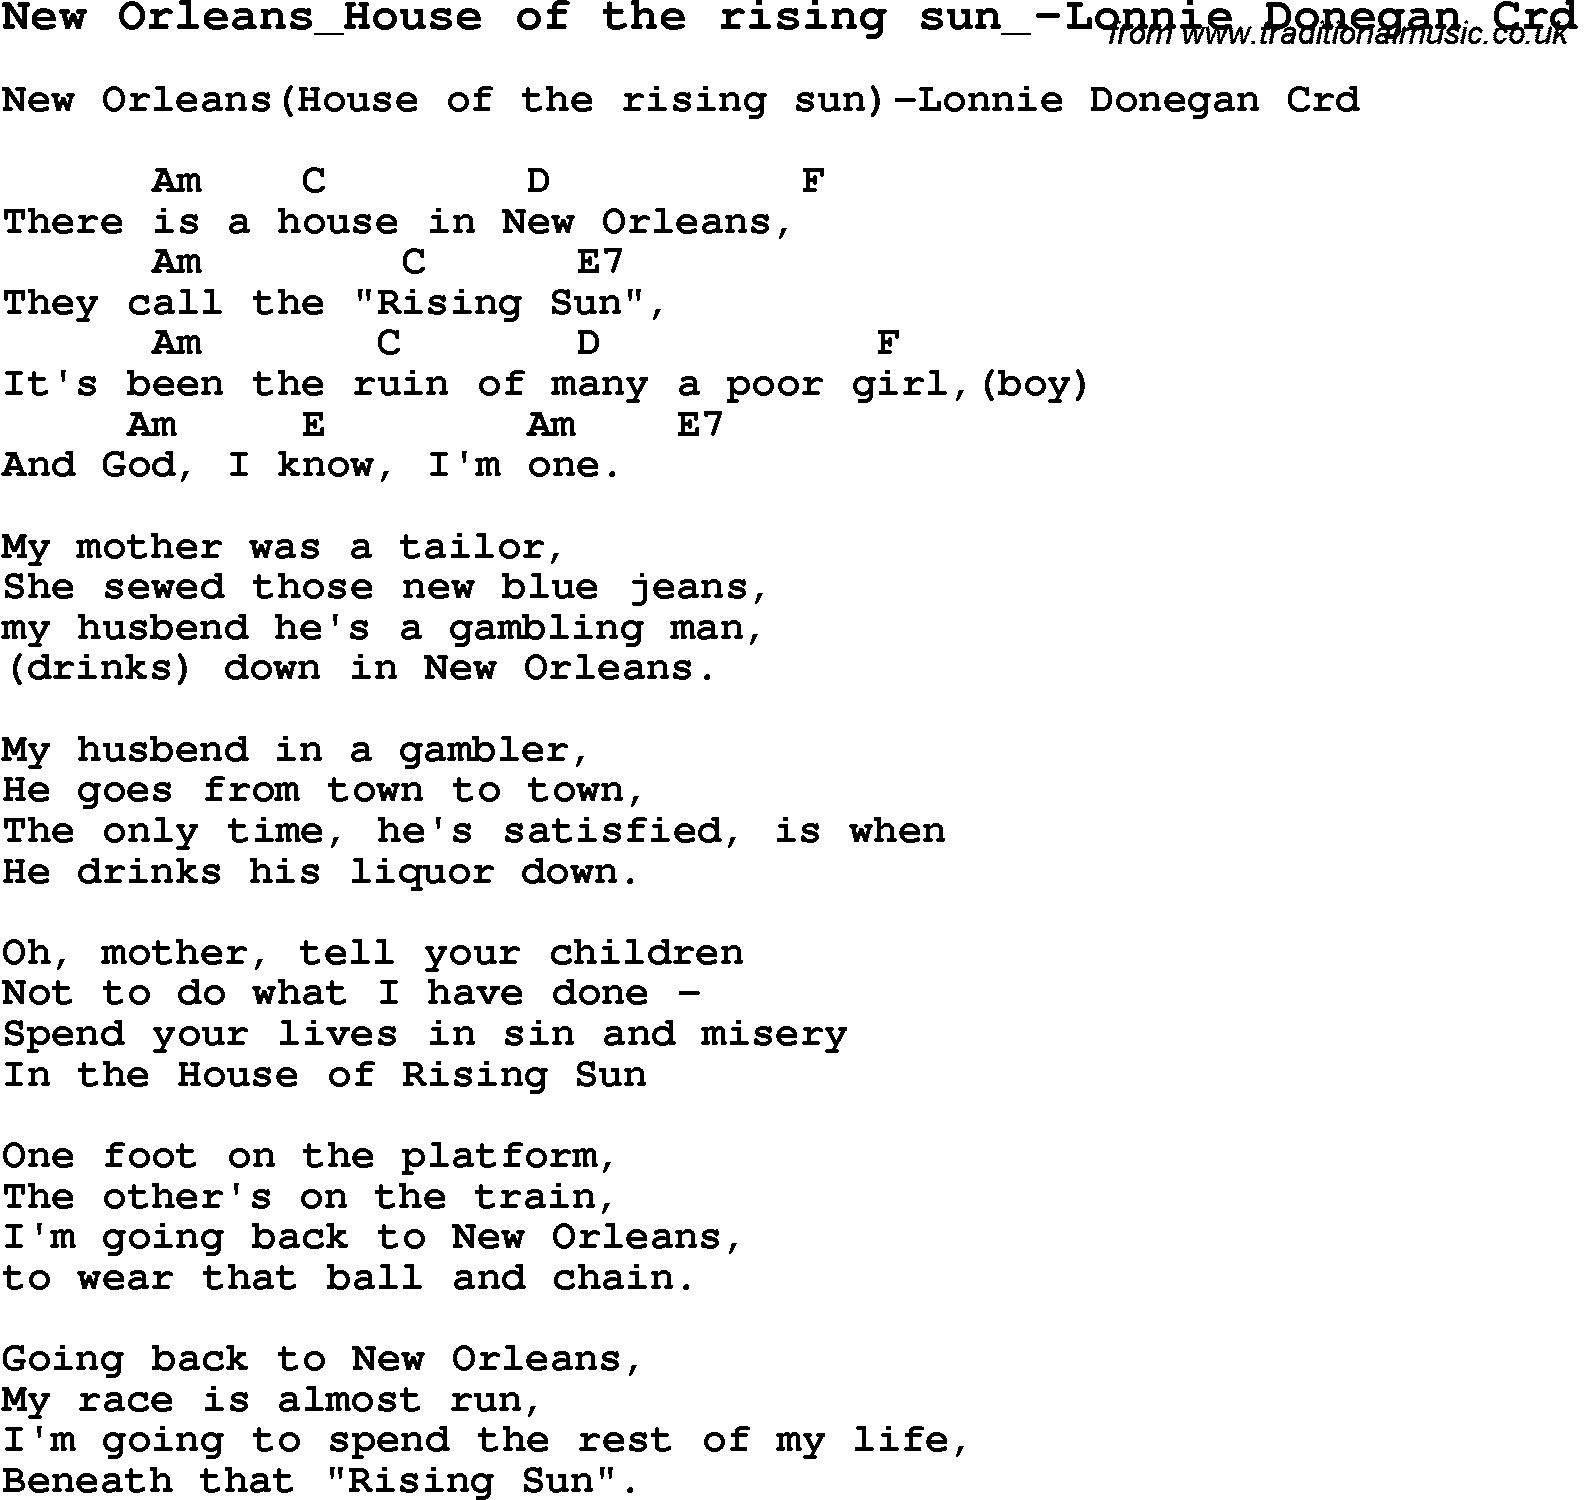 Skiffle Song Lyrics for New Orleans House Of The Rising Sun-Lonnie Donegan with chords for Mandolin, Ukulele, Guitar, Banjo etc.